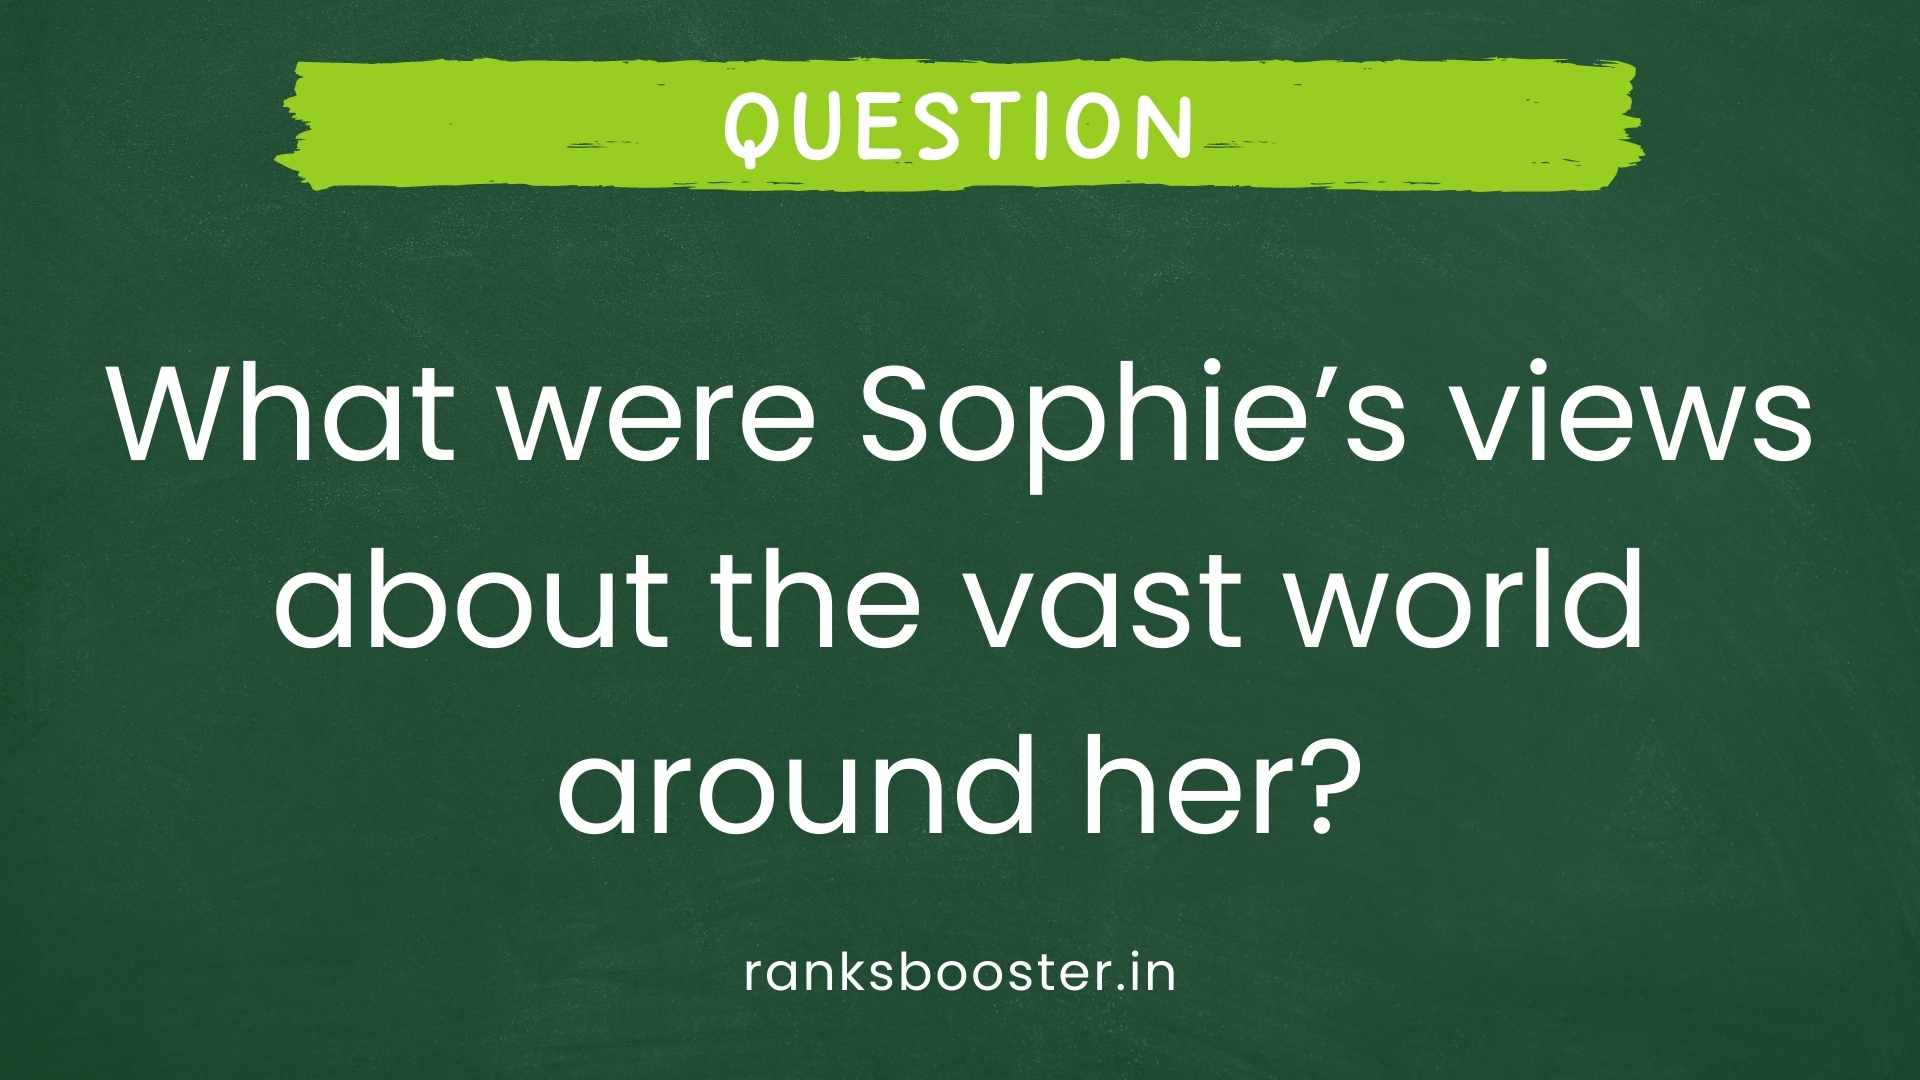 Question: What were Sophie’s views about the vast world around her?